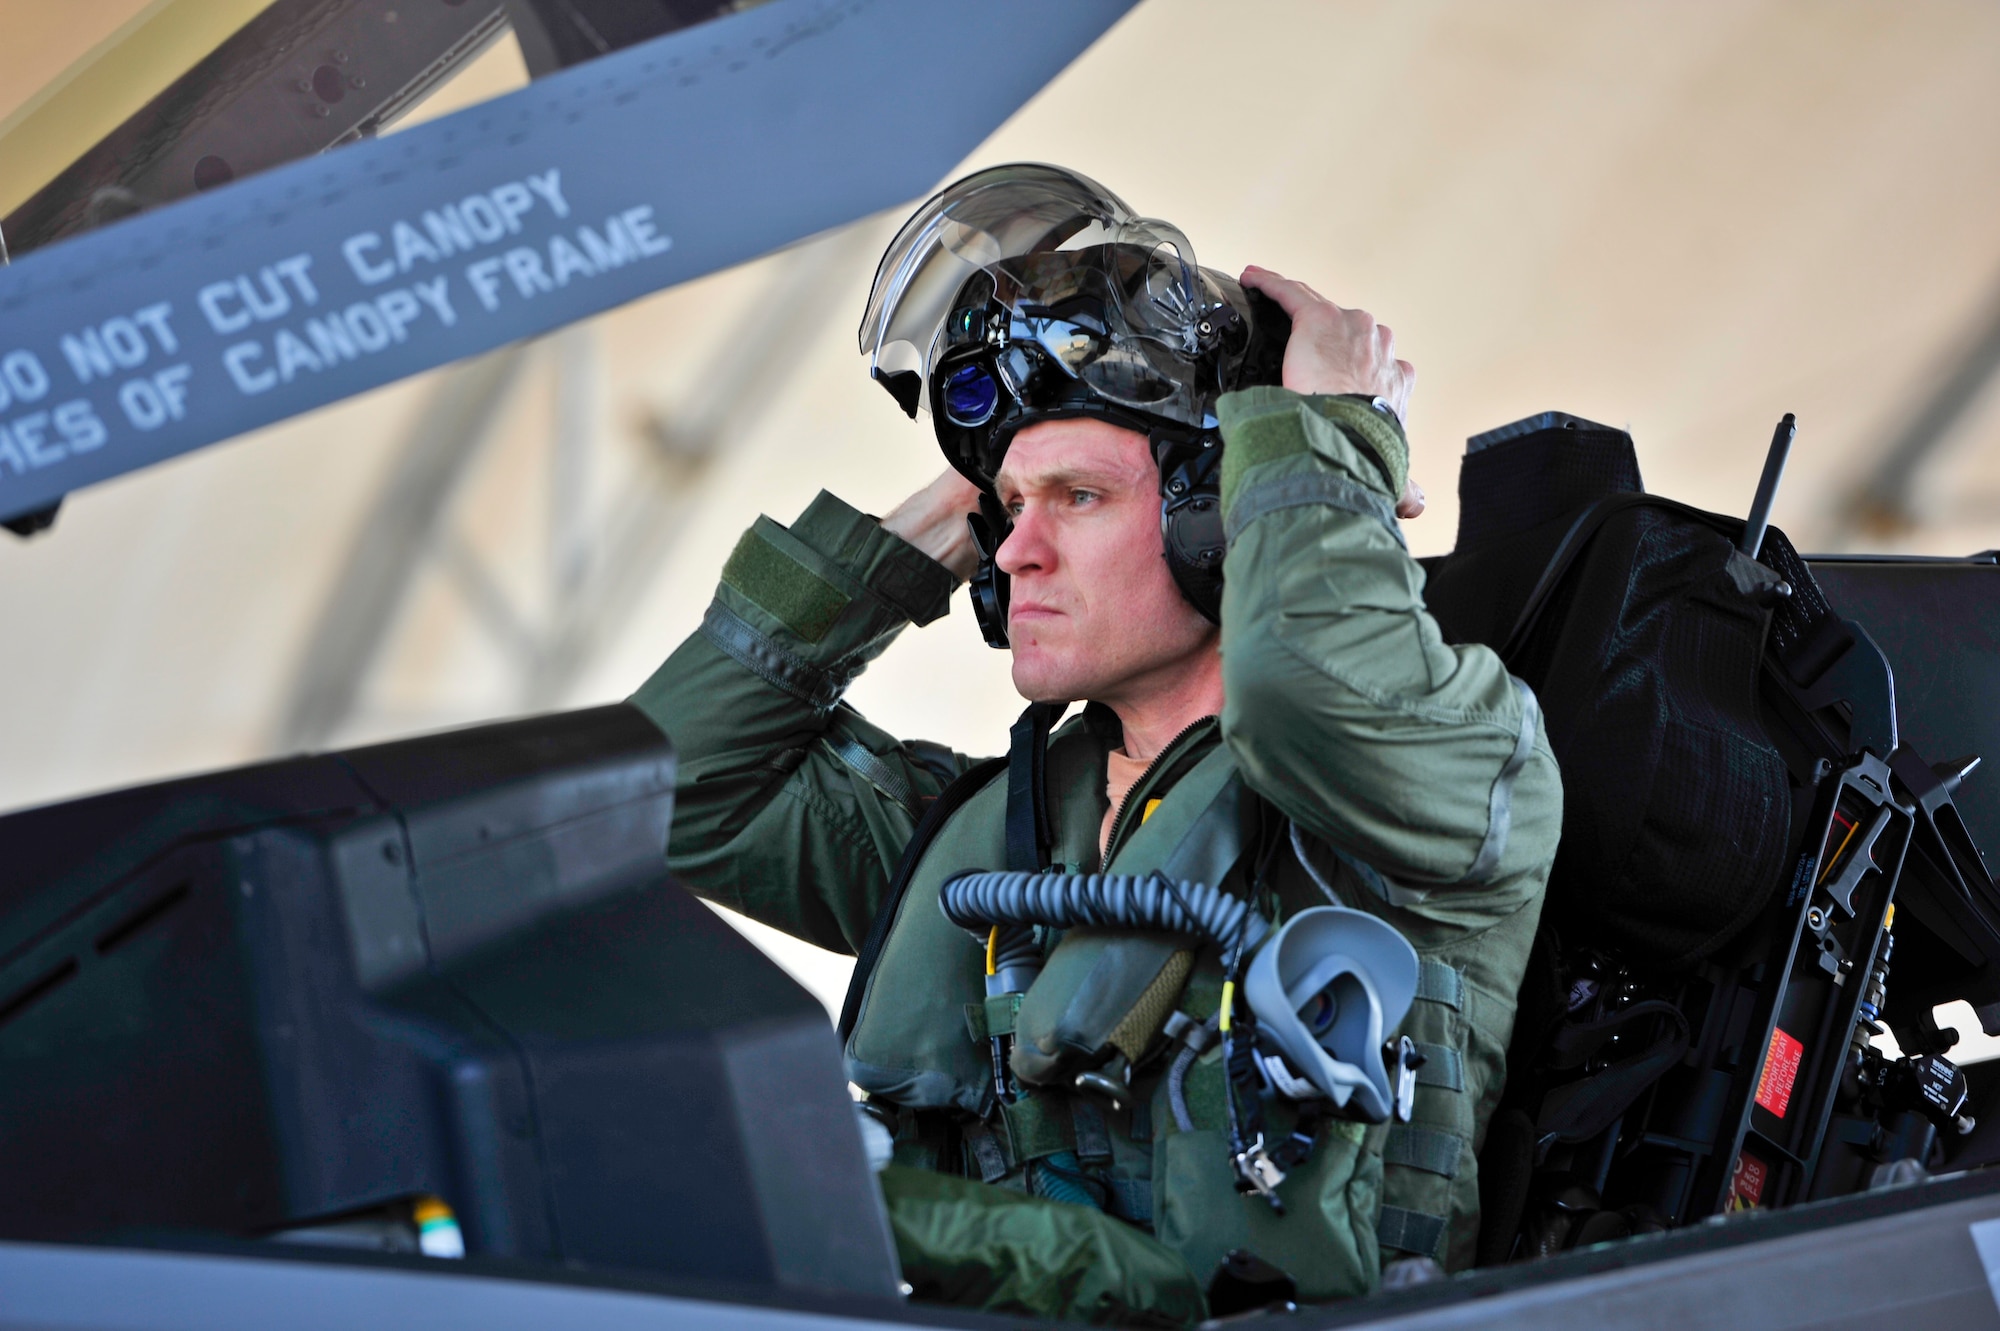 Royal Australian Air Force Squadron Leader Andrew Jackson, F-35 Lightning II student pilot, puts on his helmet before his first flight in an F-35A on Eglin Air Force Base, Fla., March 18, 2015. Jackson made history as the first Australian pilot to fly in the F-35A. The fifth-generation aircraft will meet Australia’s future air combat and strike needs, providing a networked force-multiplier effect in terms of situational awareness and combat effectiveness. (U.S. Air Force photo/Staff Sgt. Marleah Robertson)